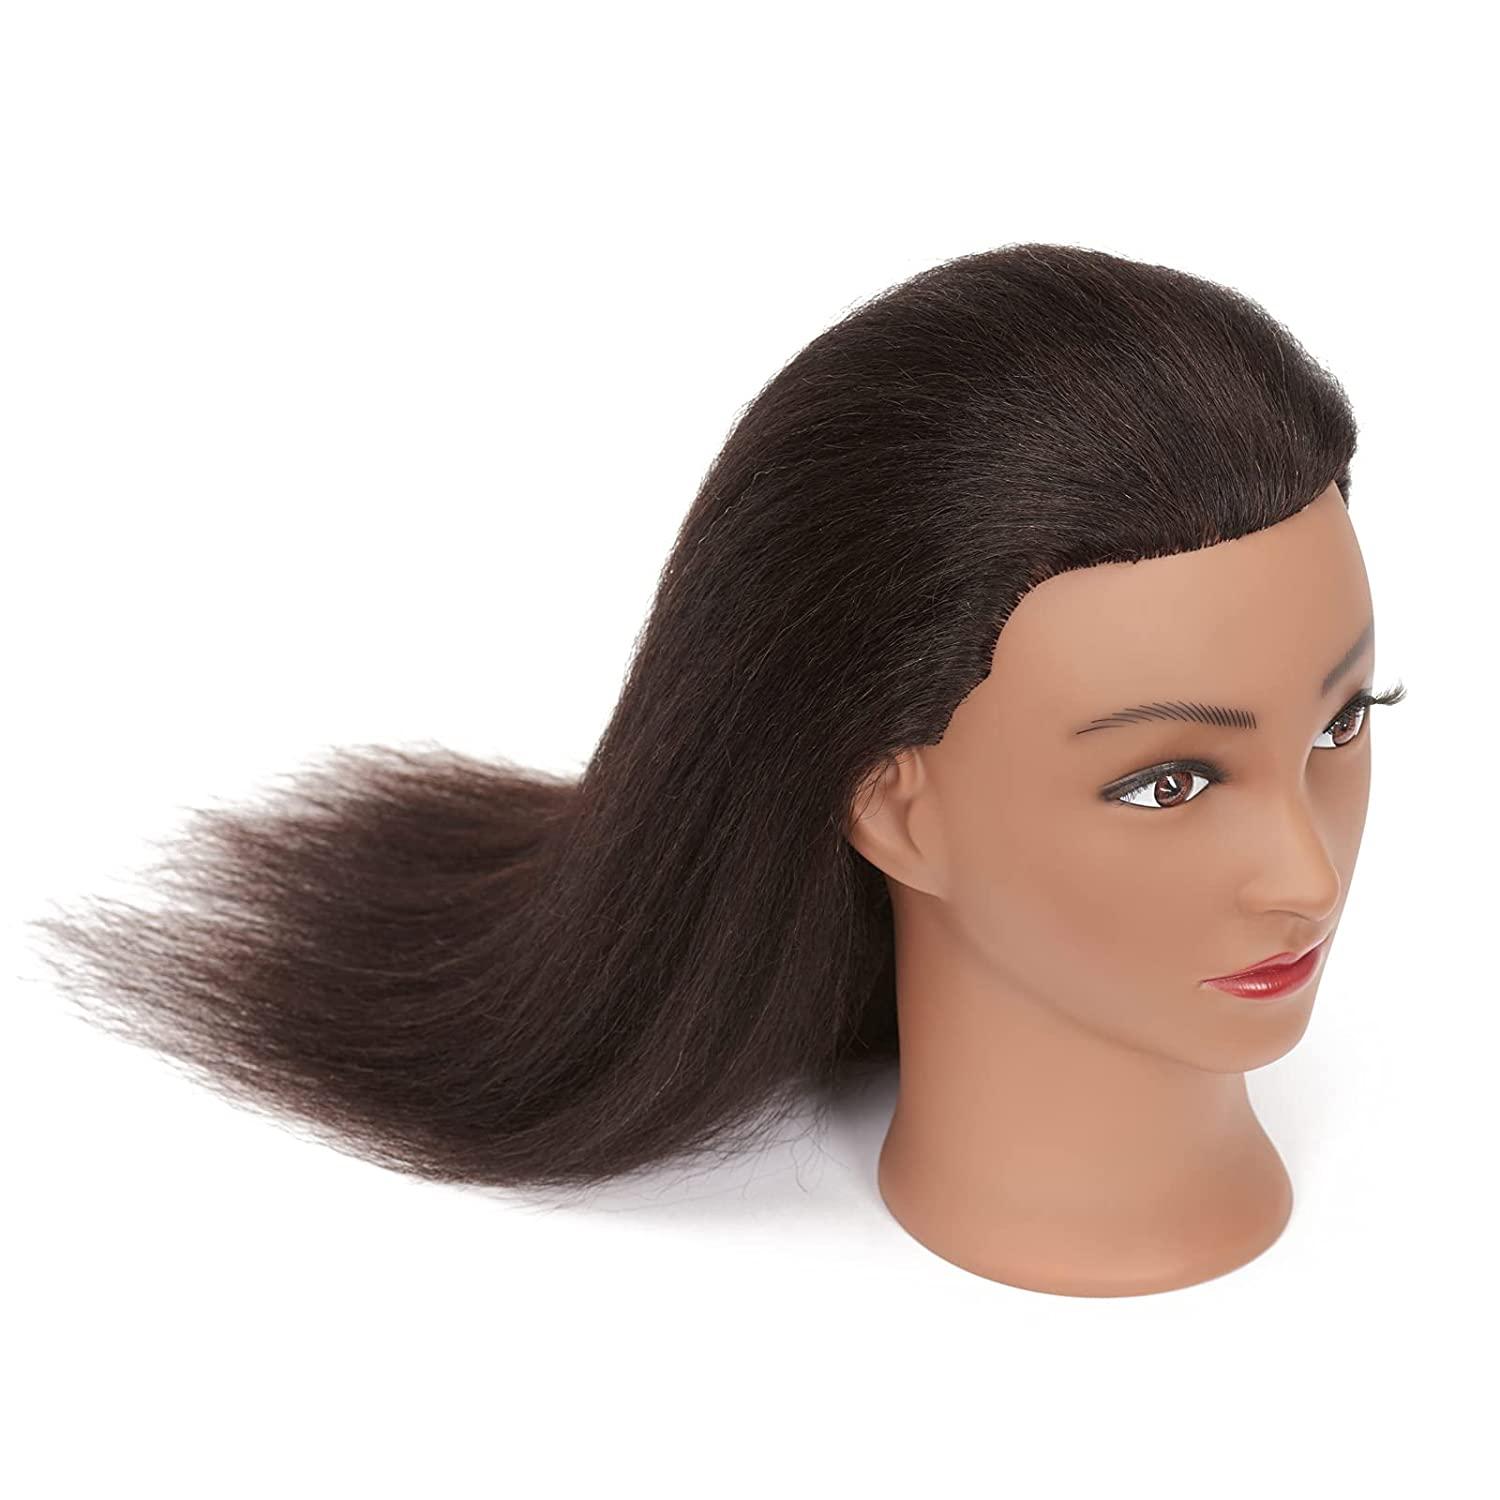 Hairginkgo Mannequin Head 100% Real Hair Manikin Head Styling Hairdresser  Training Head Cosmetology Doll Head for Dyeing Cutting Braiding Practice  with Clamp Stand (2022B0214) 92022B0214